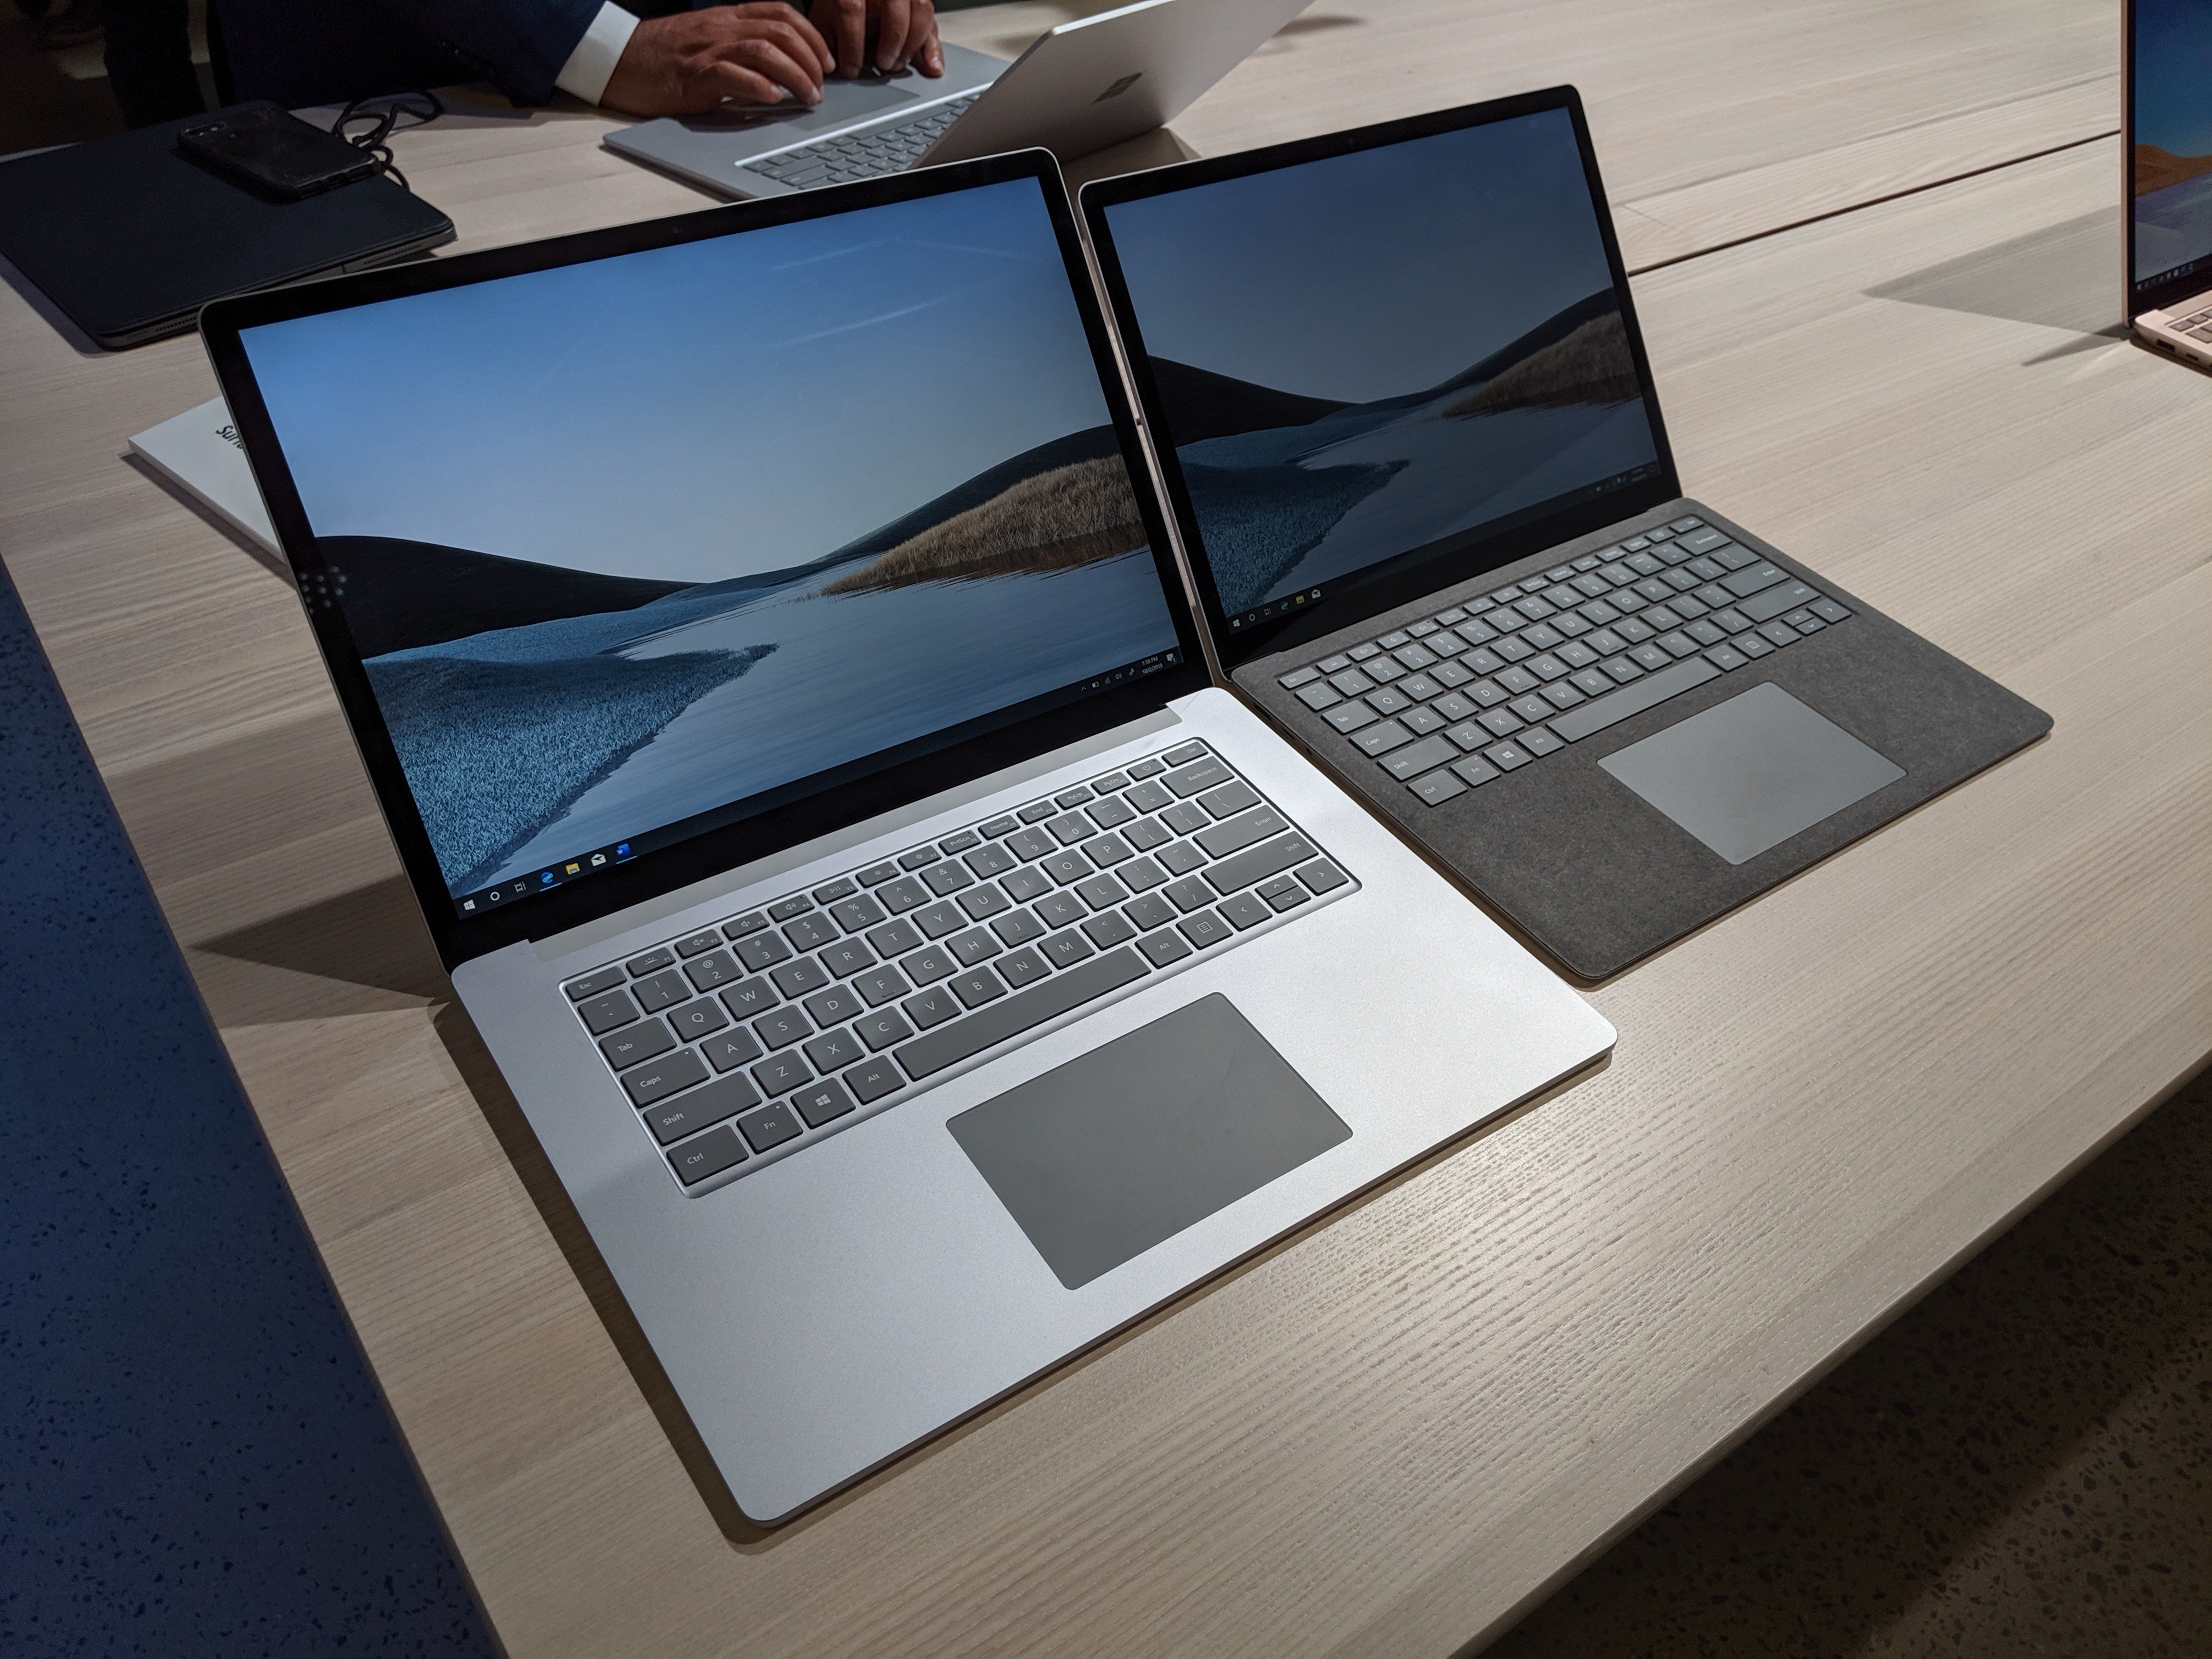 Hands on with the Microsoft Surface Laptop 3: Gorgeous reworking